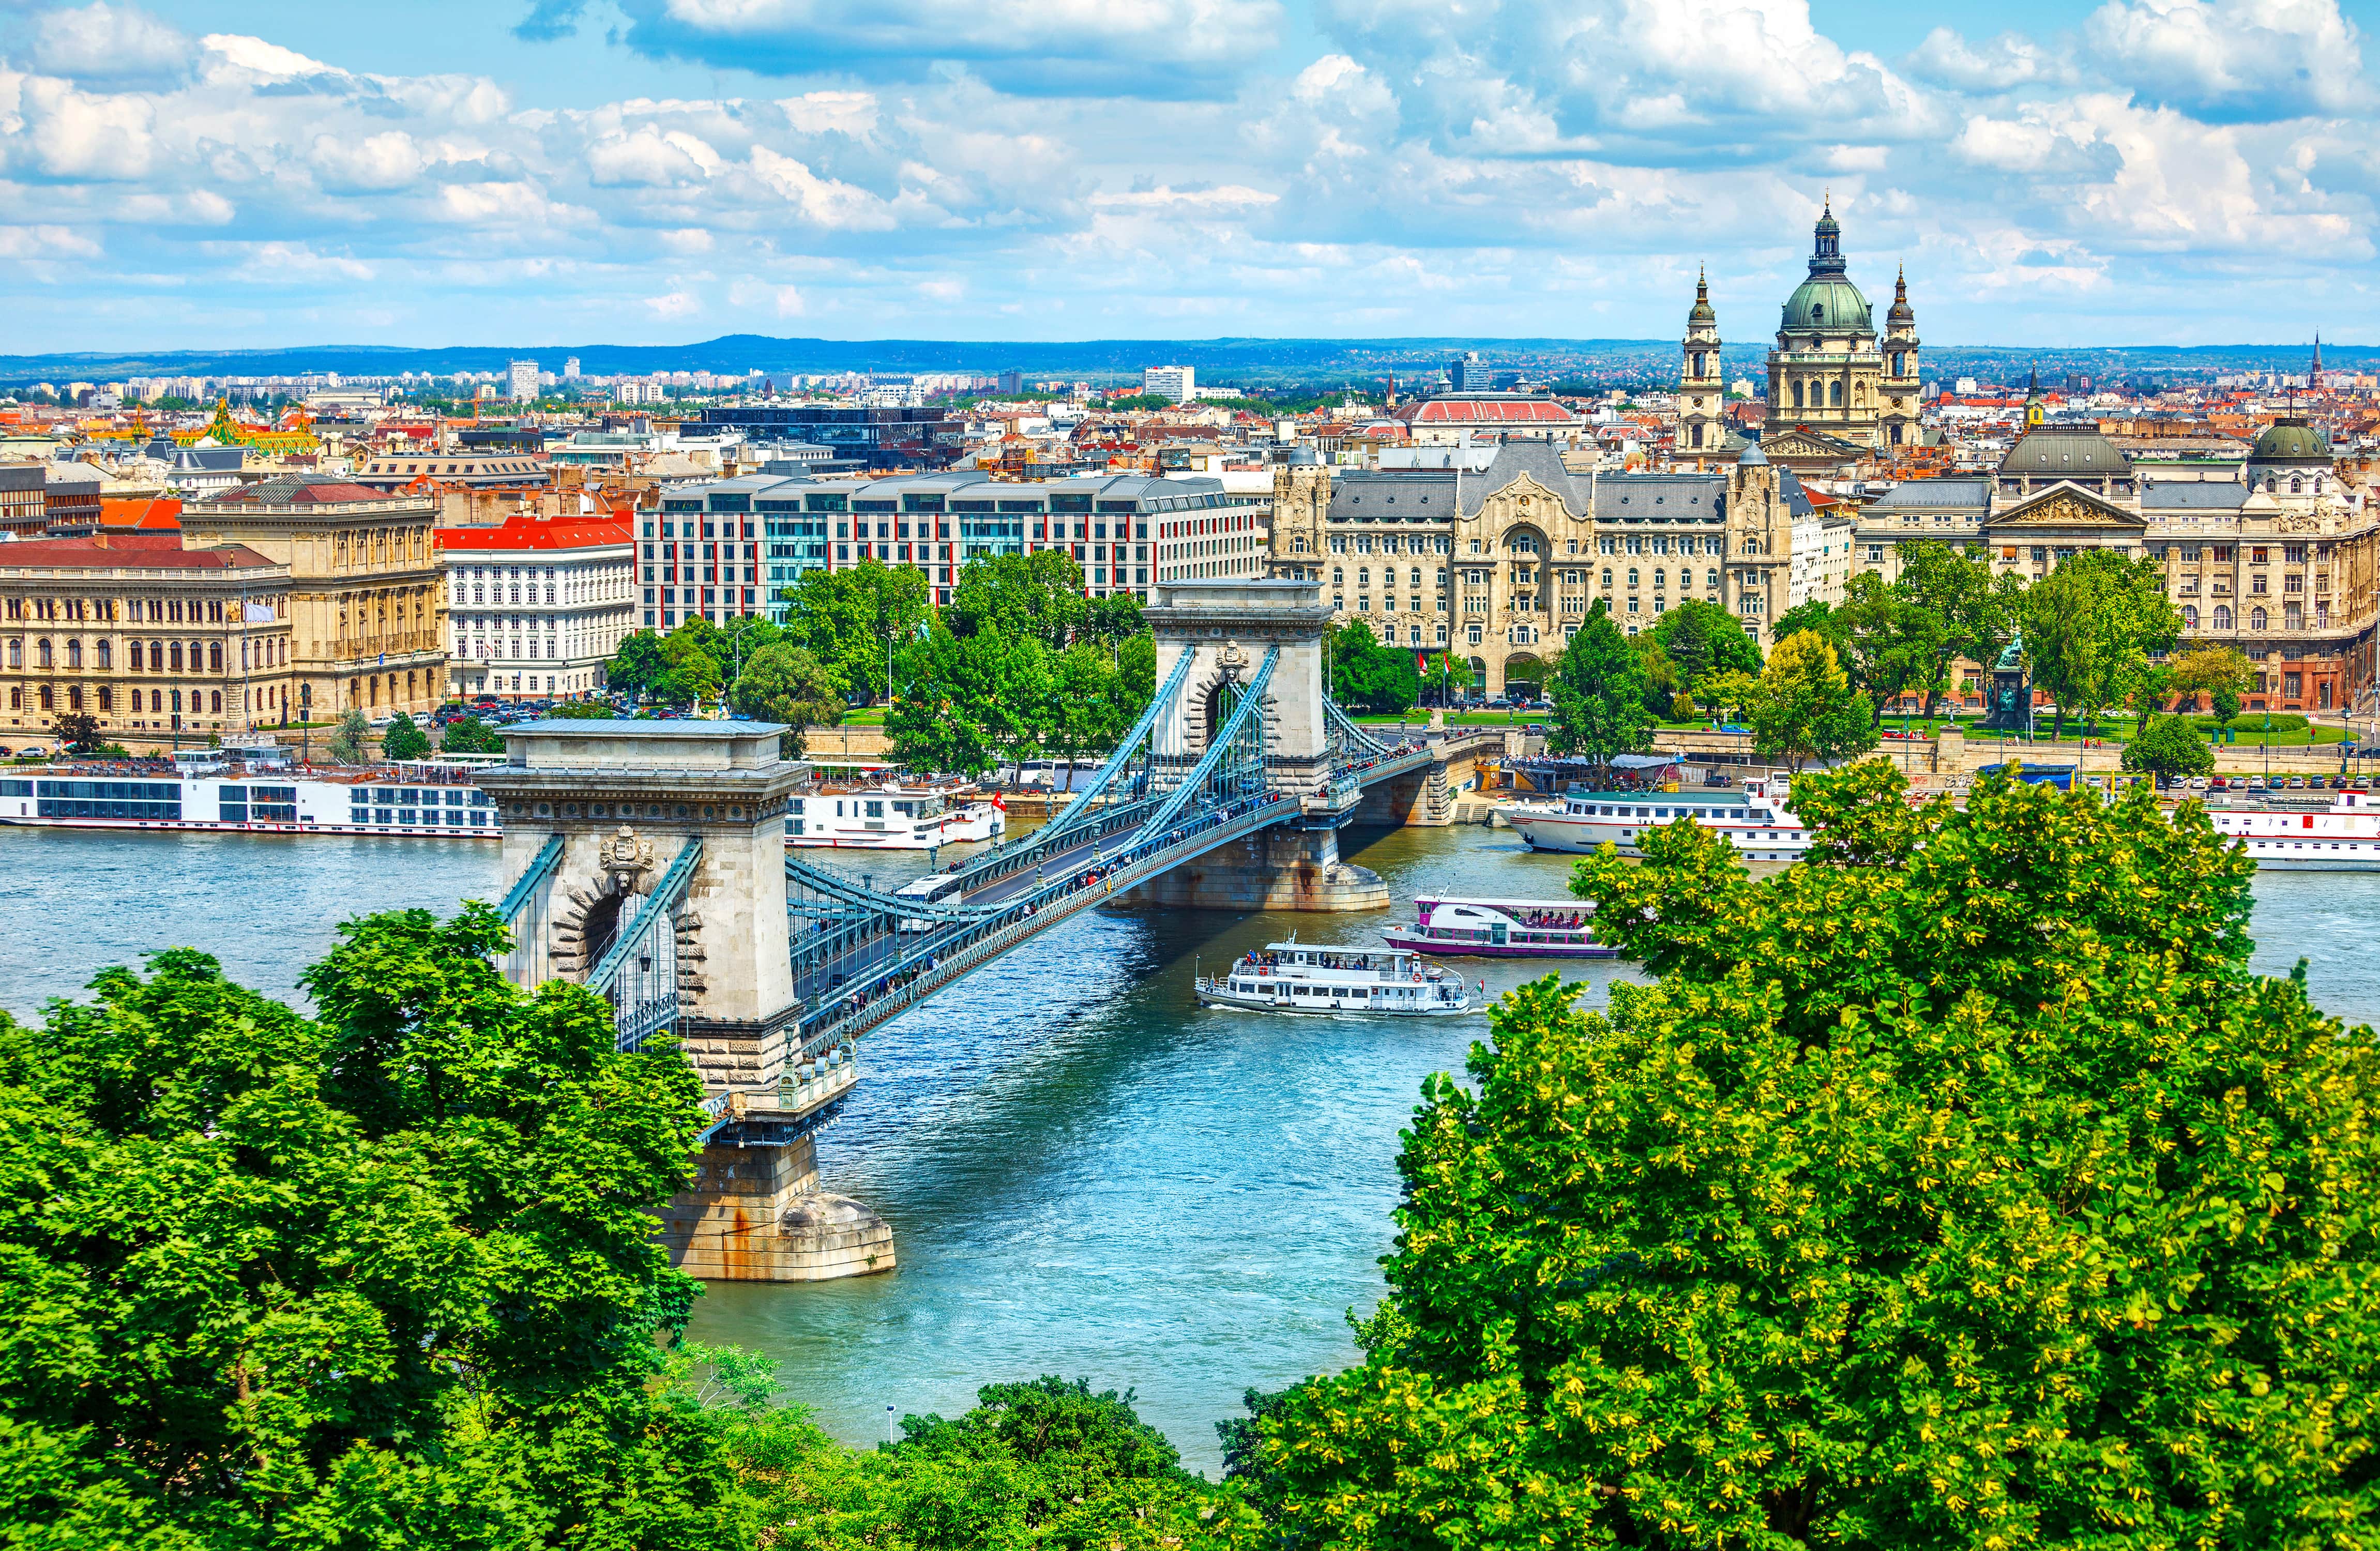 Picture of thick green trees in the foreground with the river Danube and the city in the background